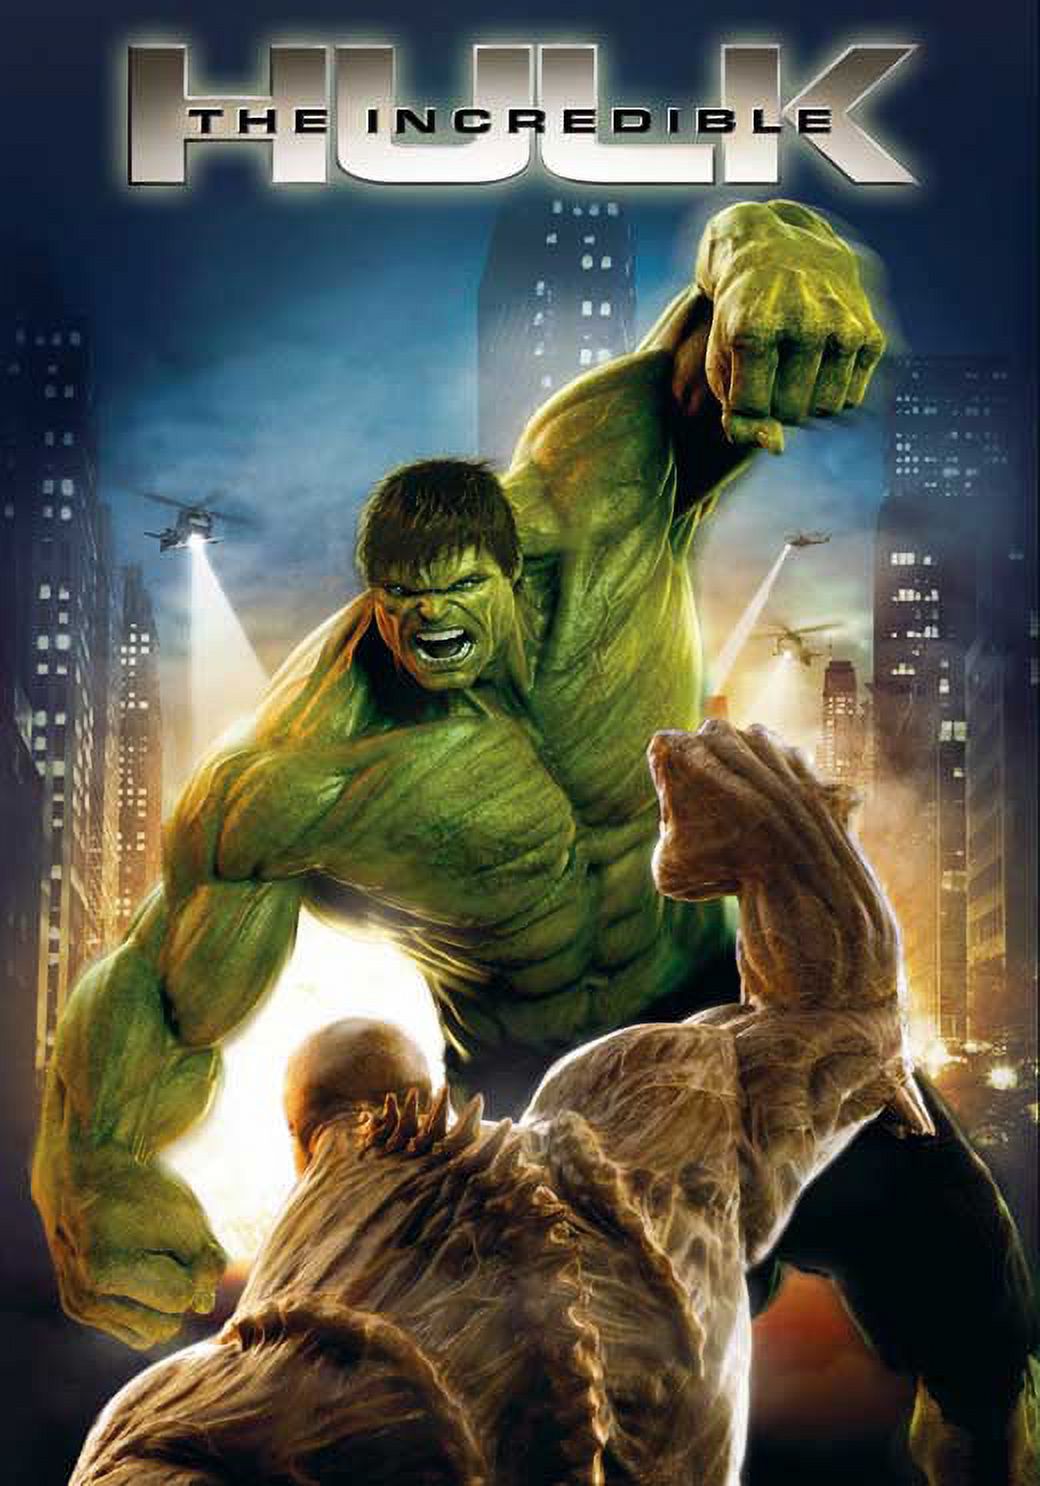 The Incredible Hulk (2008) 11x17 Movie Poster - image 1 of 2